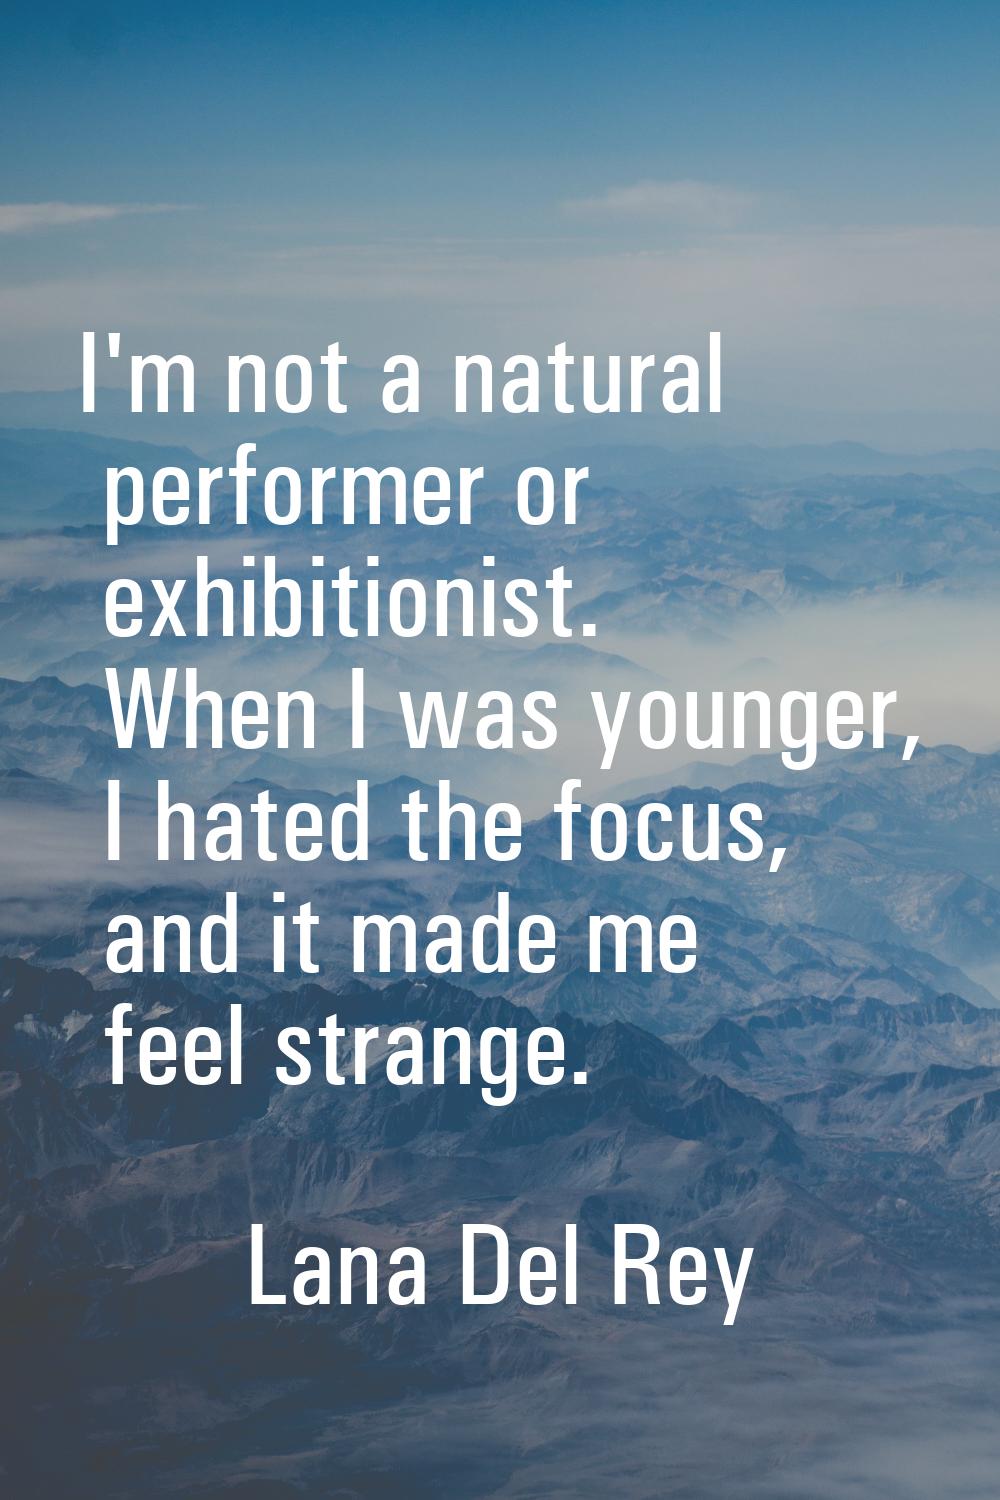 I'm not a natural performer or exhibitionist. When I was younger, I hated the focus, and it made me